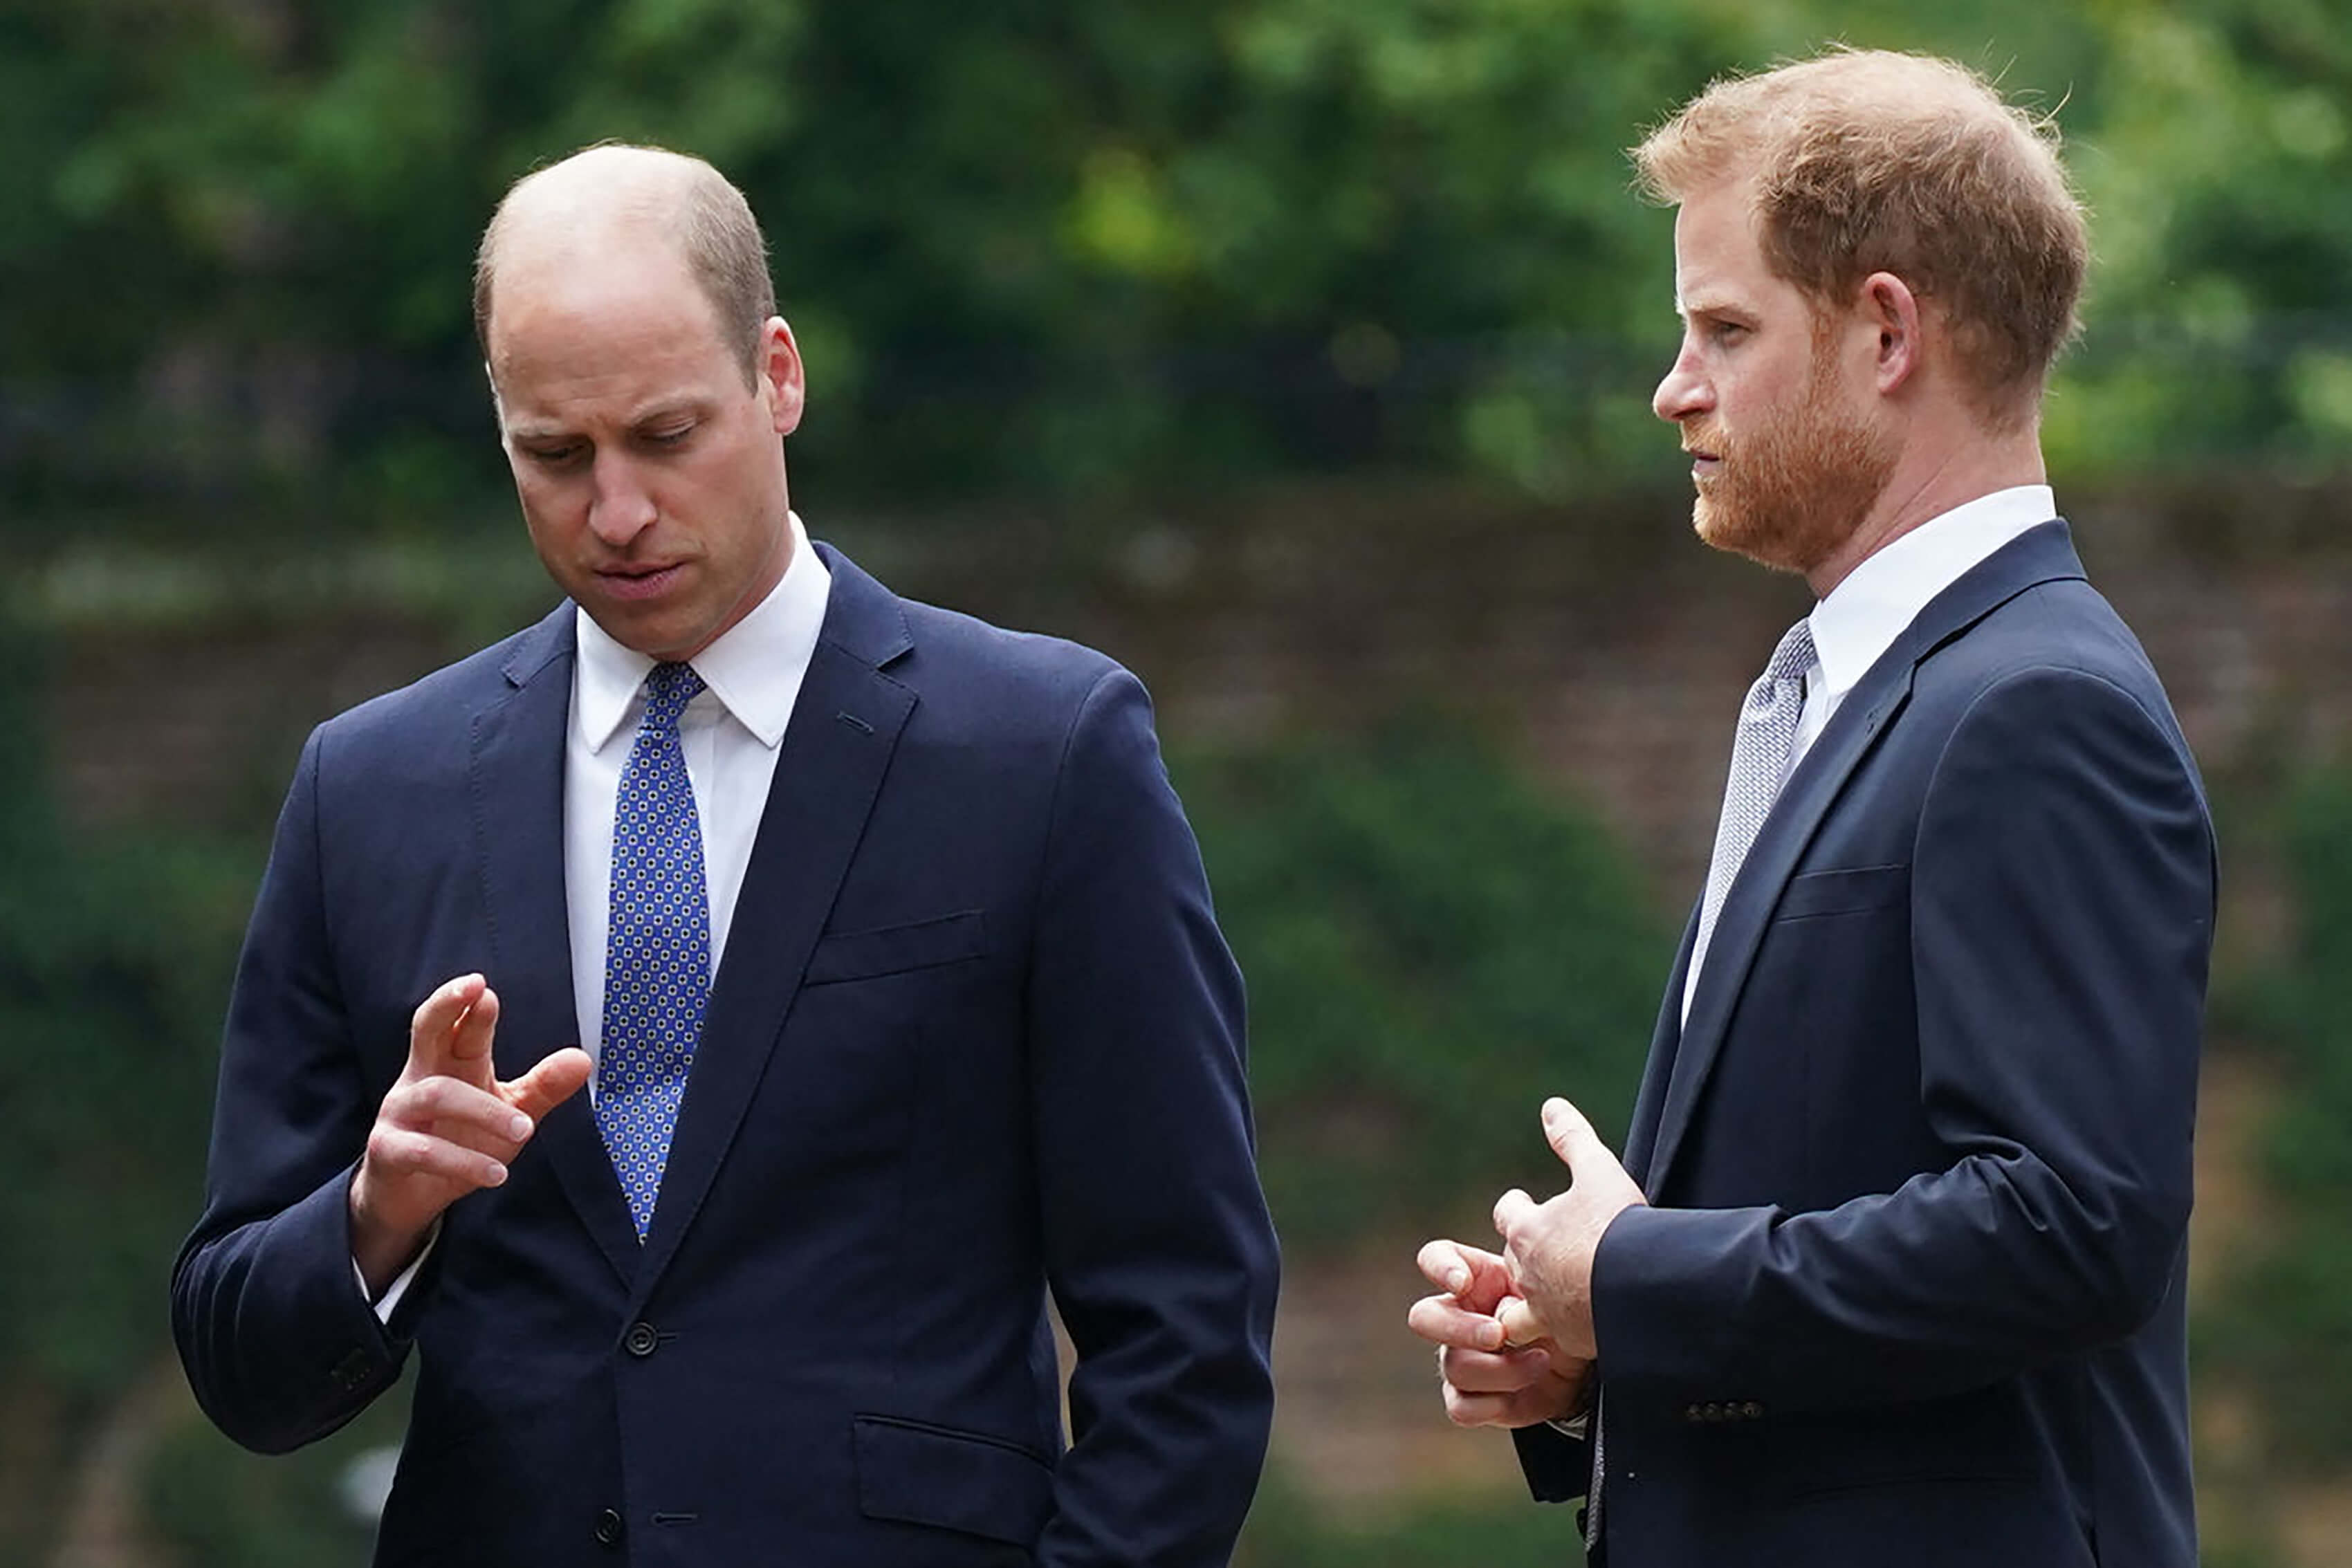 Prince William and Prince Harry, who a body language expert says had their rift on display for everyone to see during event, speaking before the unveiling of the statue for their mother Princess Diana